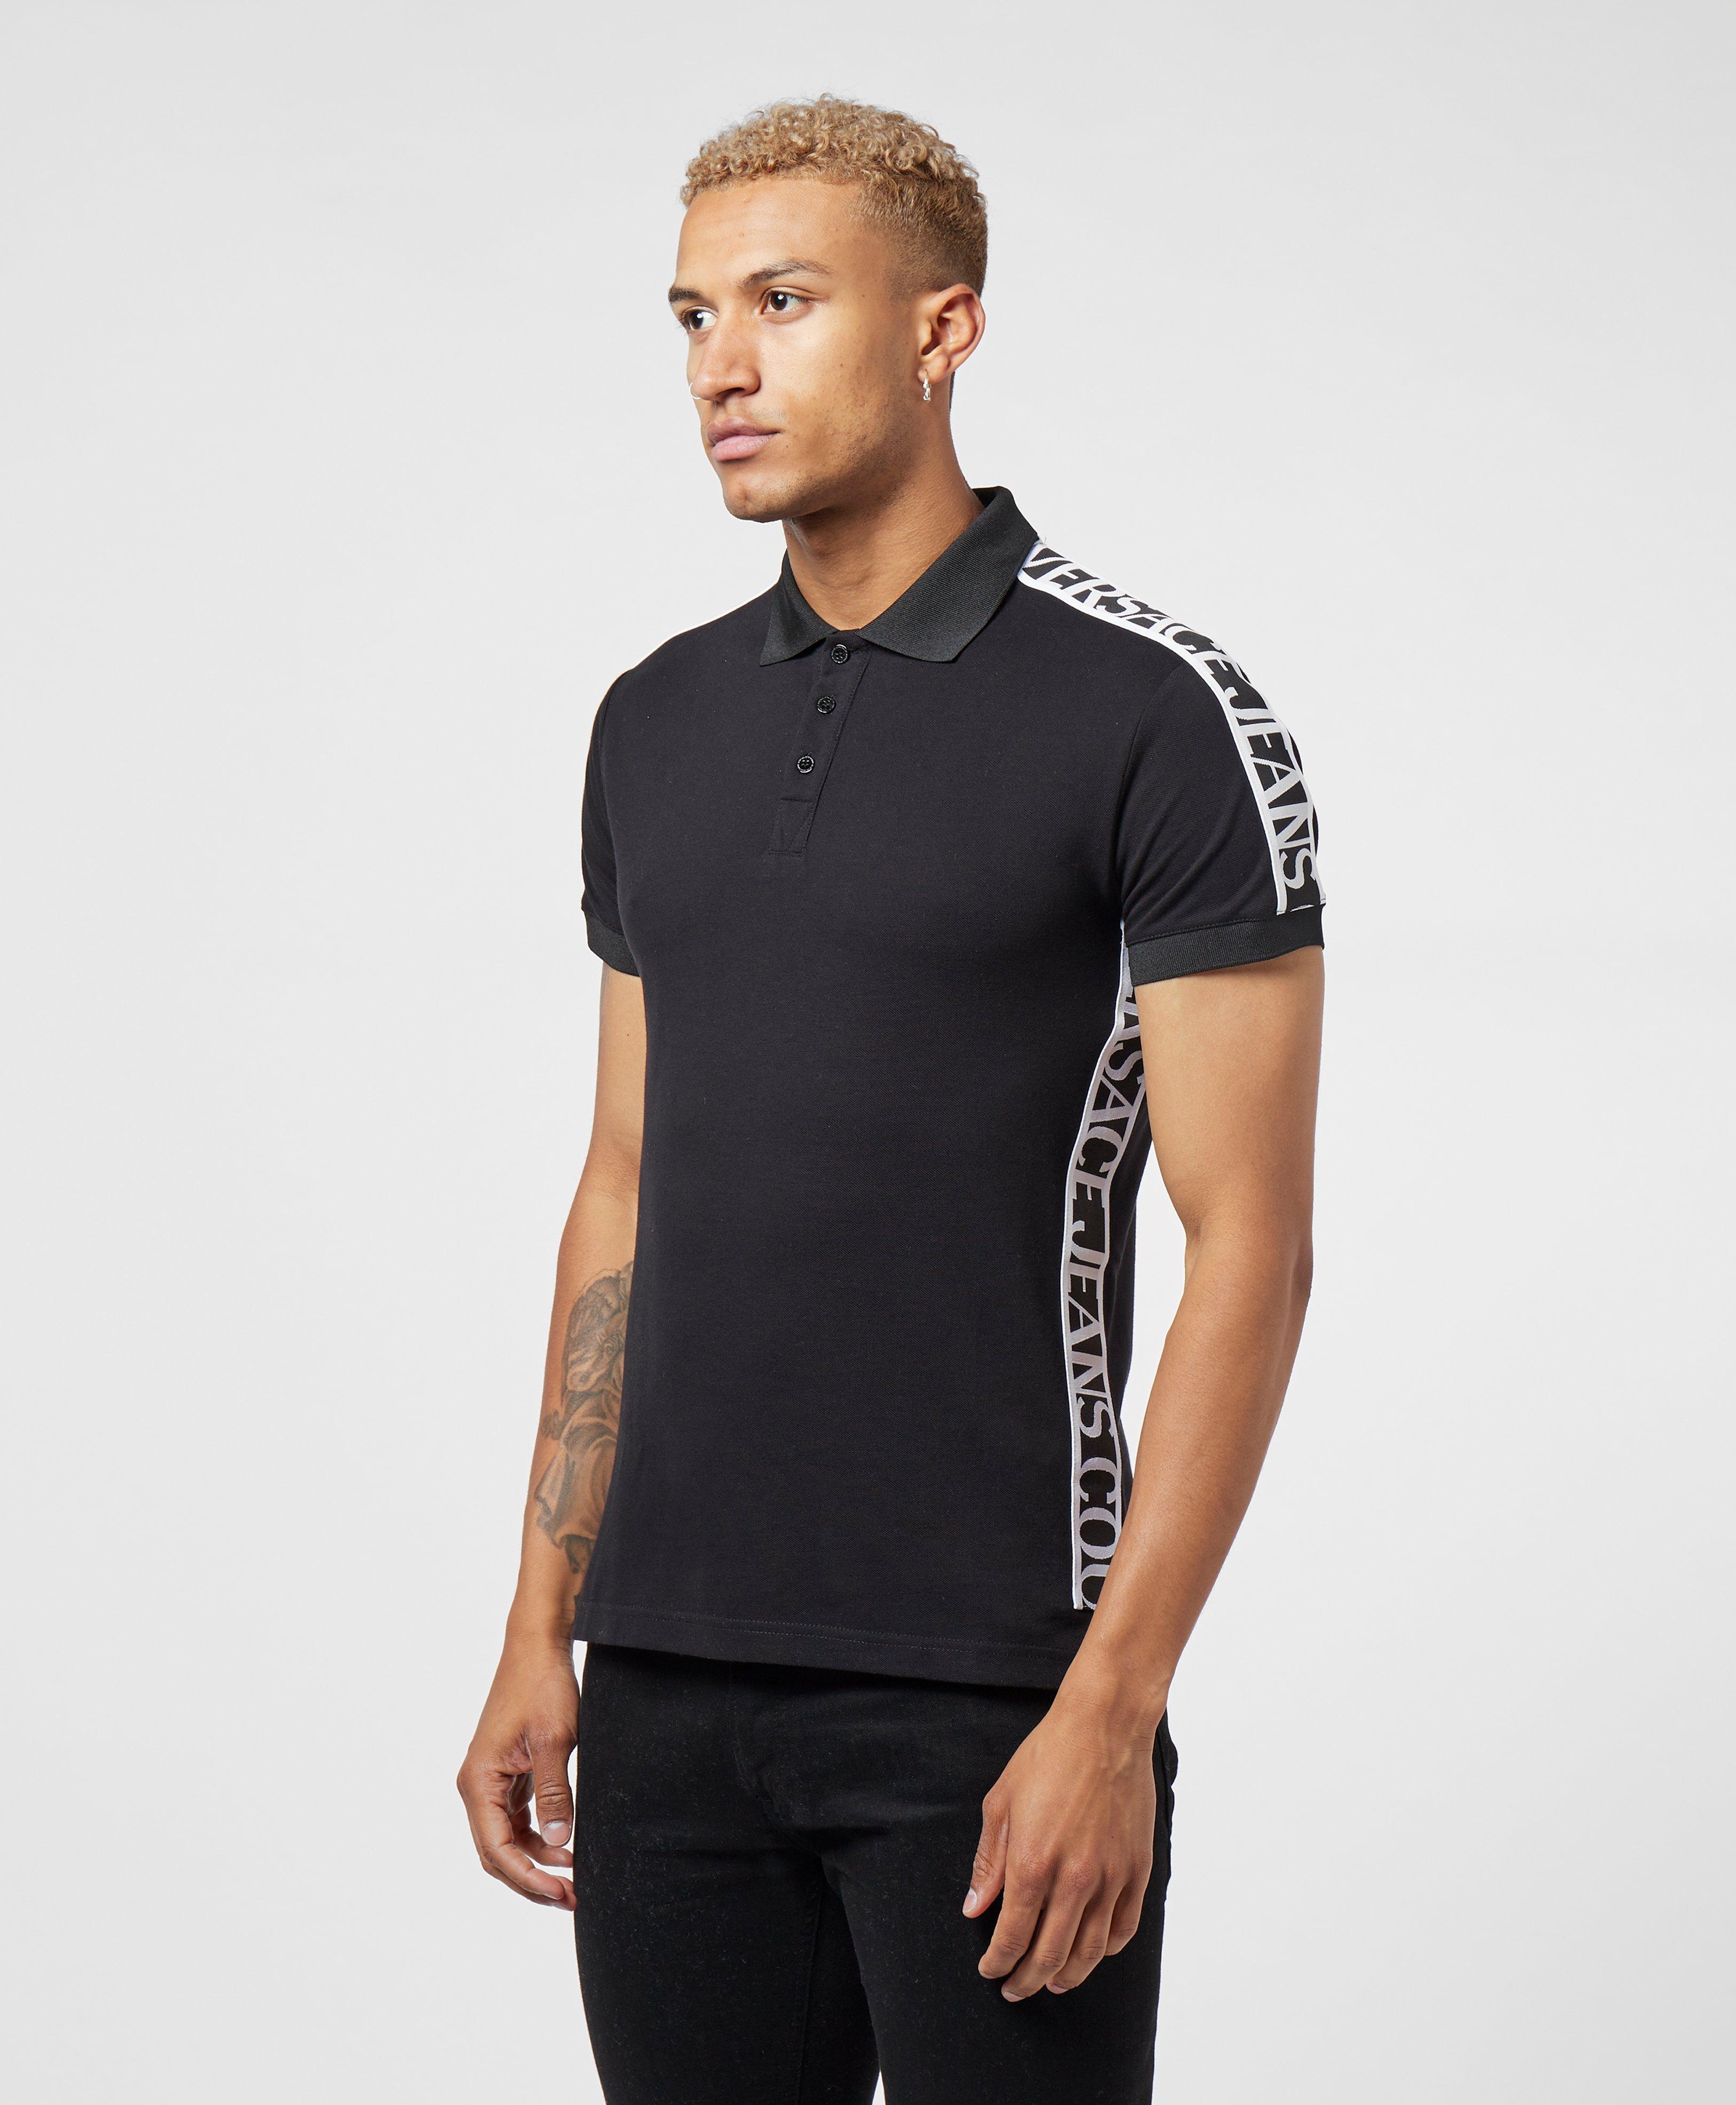 Versace Jeans Tape Short Sleeve Polo Shirt in Black for Men - Lyst